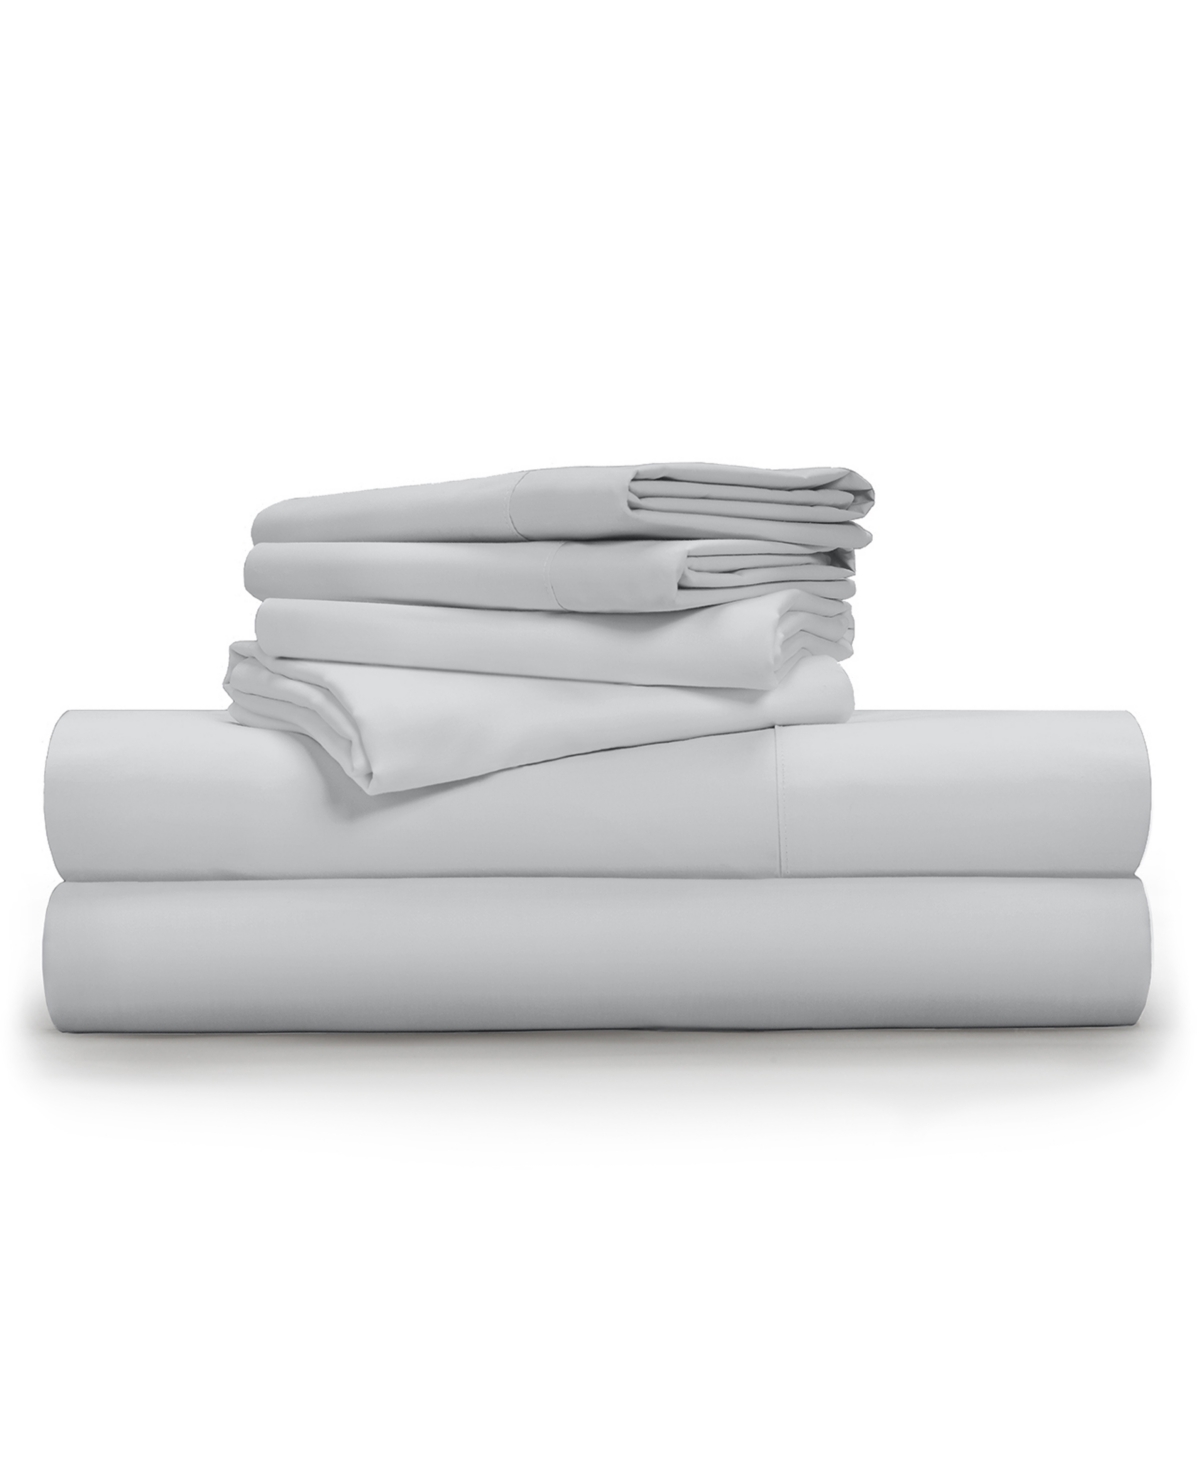 Pillow Guy 600 Thread Count Luxe Soft & Smooth 6 Piece Sheet Set, King In Light Gray